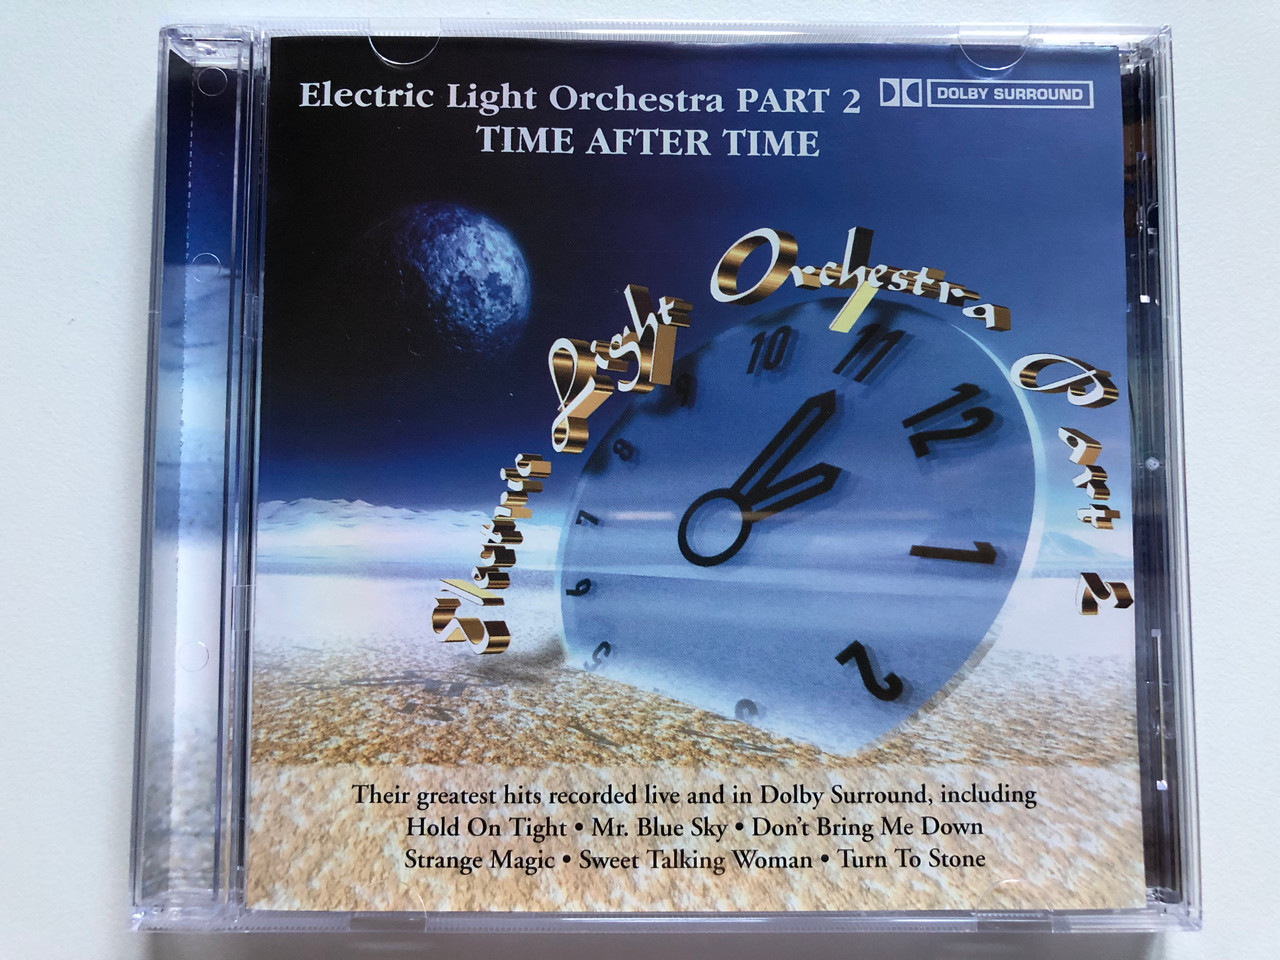 https://cdn10.bigcommerce.com/s-62bdpkt7pb/products/0/images/228495/Electric_Light_Orchestra_Part_2_Time_After_Time_Their_greatest_hits_recorded_live_and_in_Dolby_Surround_including_Hold_On_Tight_Mr._Blue_Sky_Dont_Bring_Me_Down_Strange_Magic_Going_Fo_1__68854.1653372603.1280.1280.JPG?c=2&_gl=1*18e7zzr*_ga*MjA2NTIxMjE2MC4xNTkwNTEyNTMy*_ga_WS2VZYPC6G*MTY1MzM3MTM3Ni40MDguMS4xNjUzMzcyMjEyLjM4